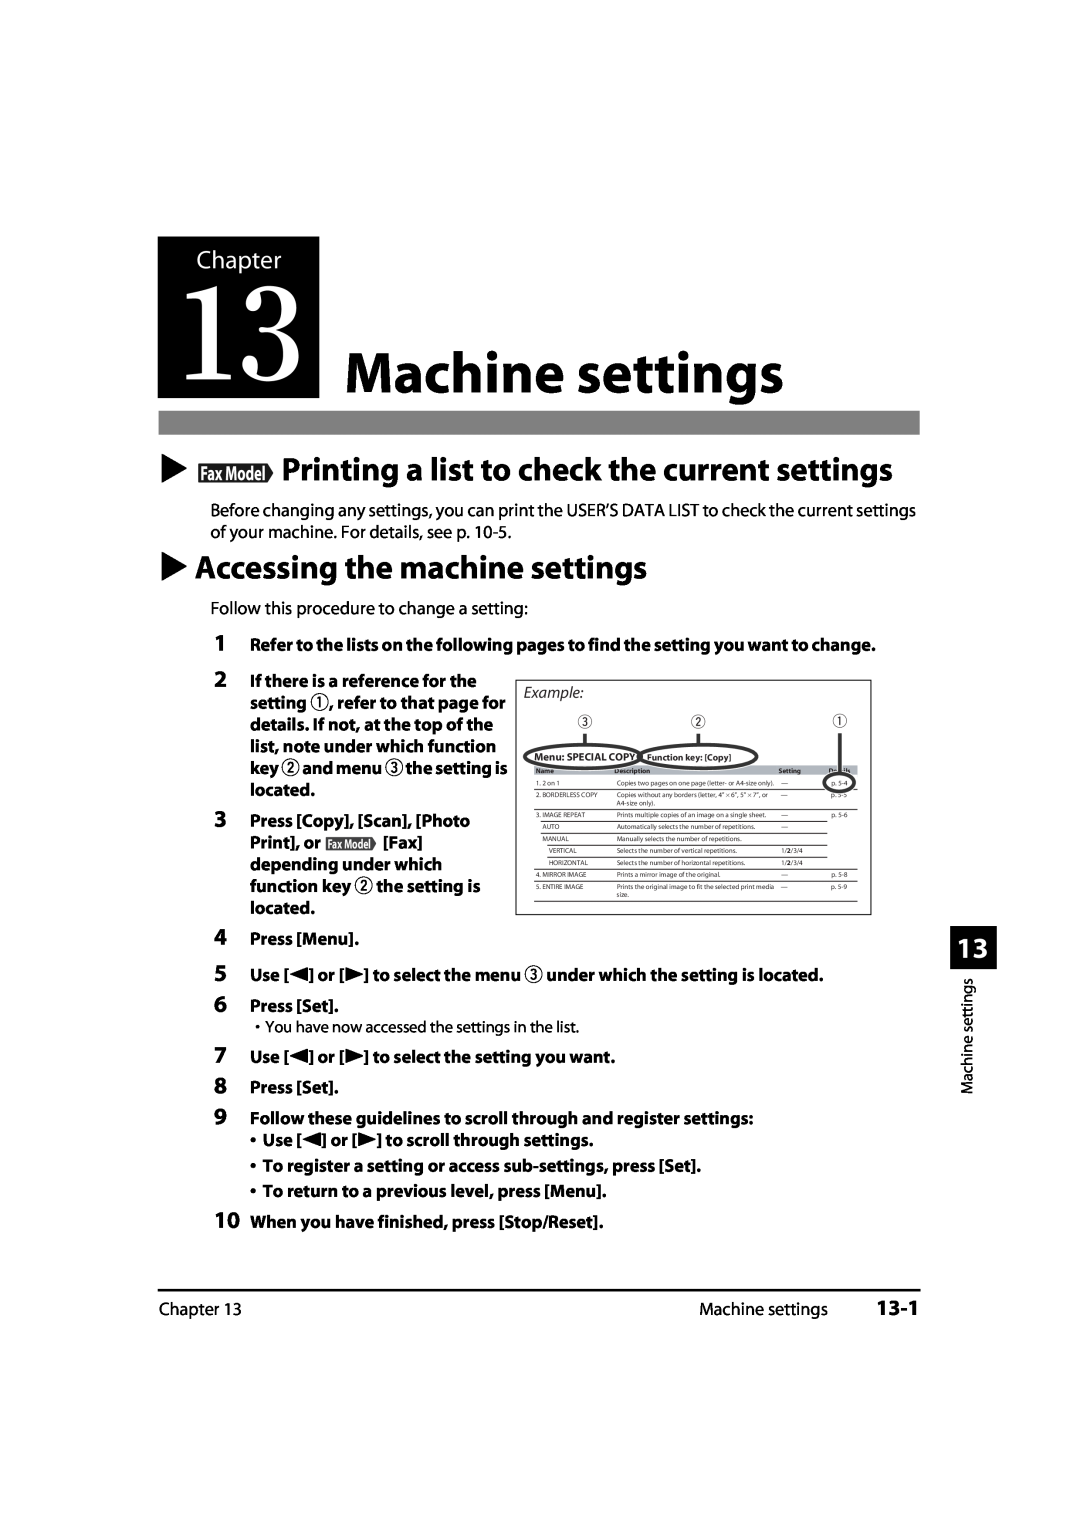 Canon MP700 Machine settings, Printing a list to check the current settings, Accessing the machine settings, 13-1, Chapter 